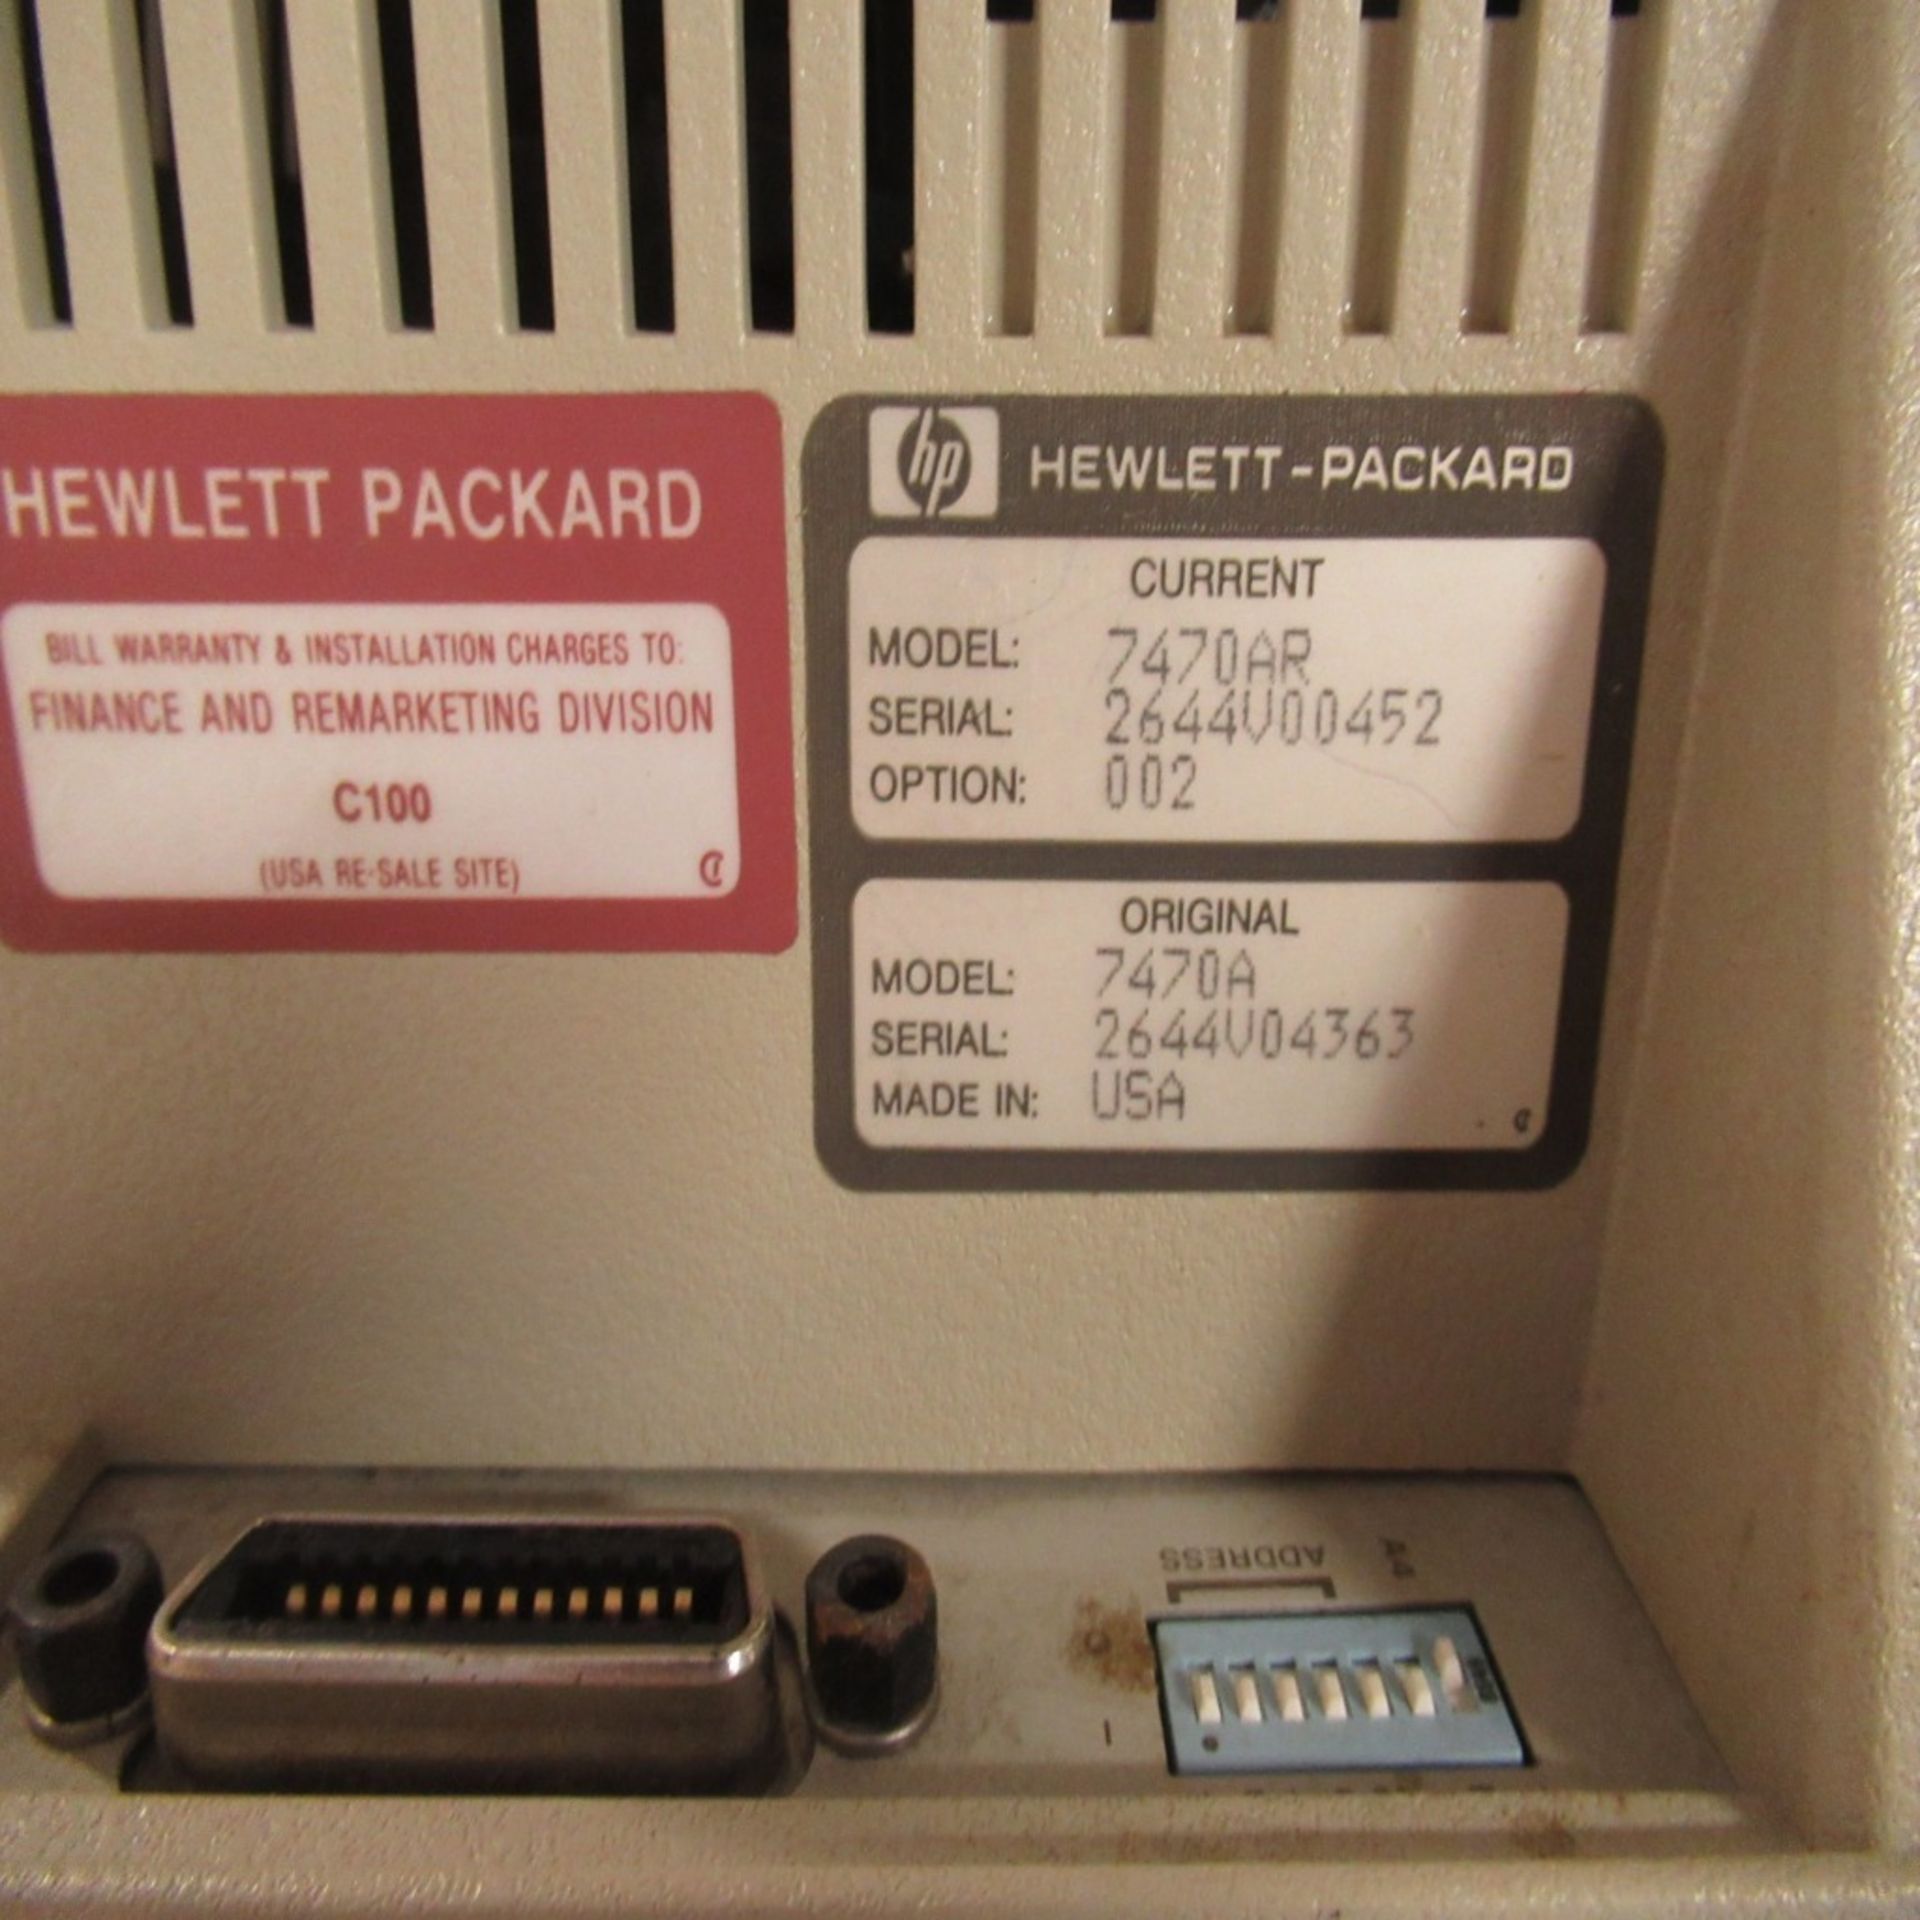 PHOTON SNAP SHOT MODEL 6000 *POWERS ON* NO SCREEN DISPLAY; FARNELL AP20-80 REGULATED POWER SUPPLY * - Image 156 of 222